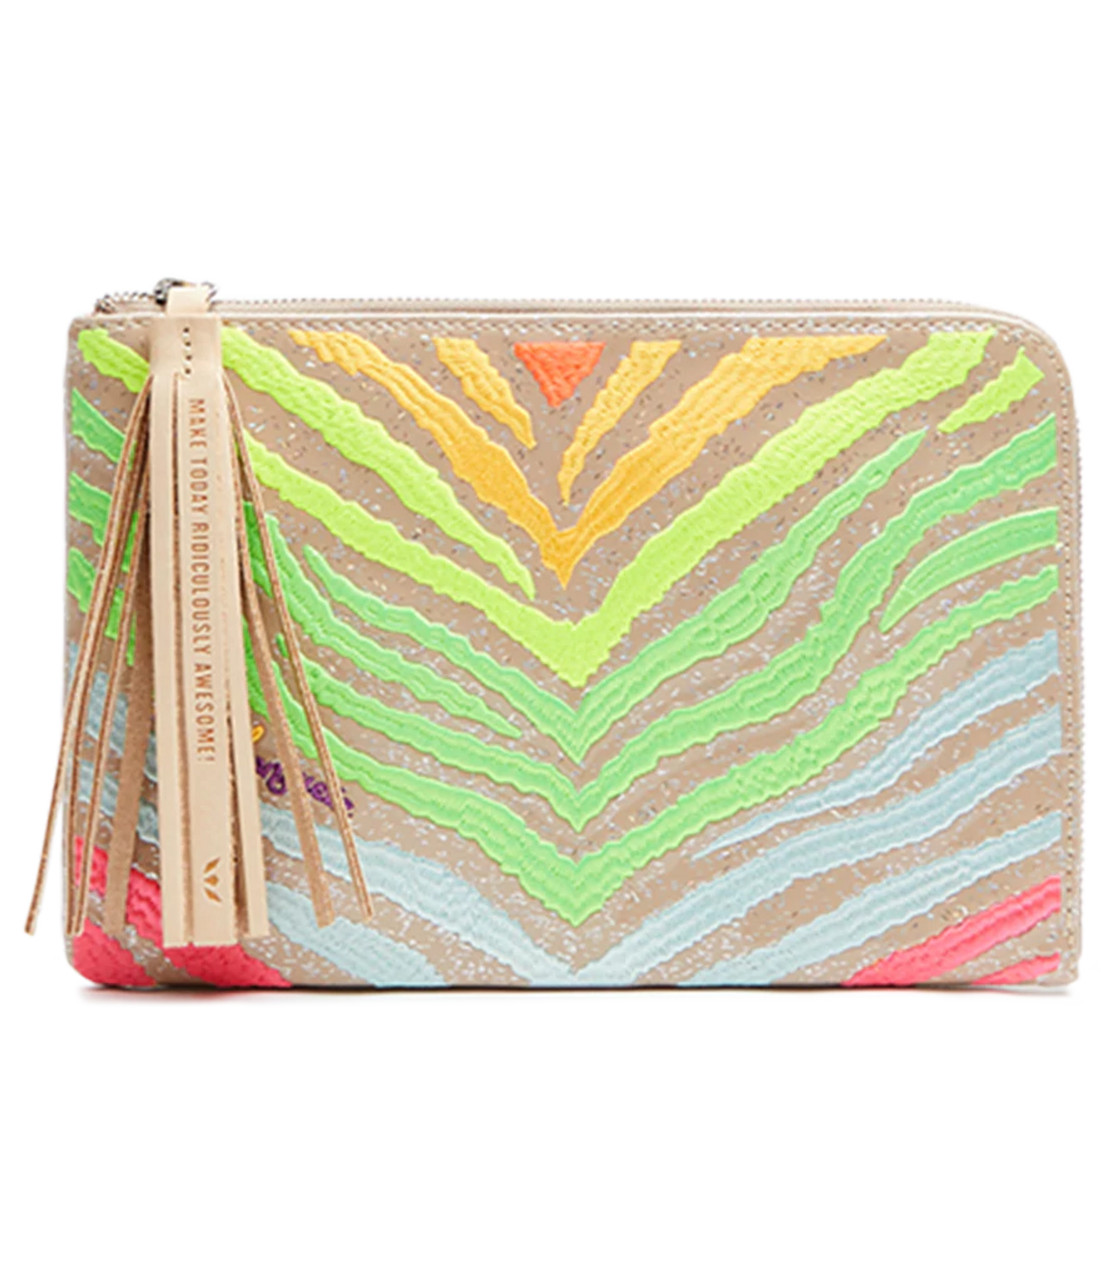 Neon Front Tab Clutch Bag